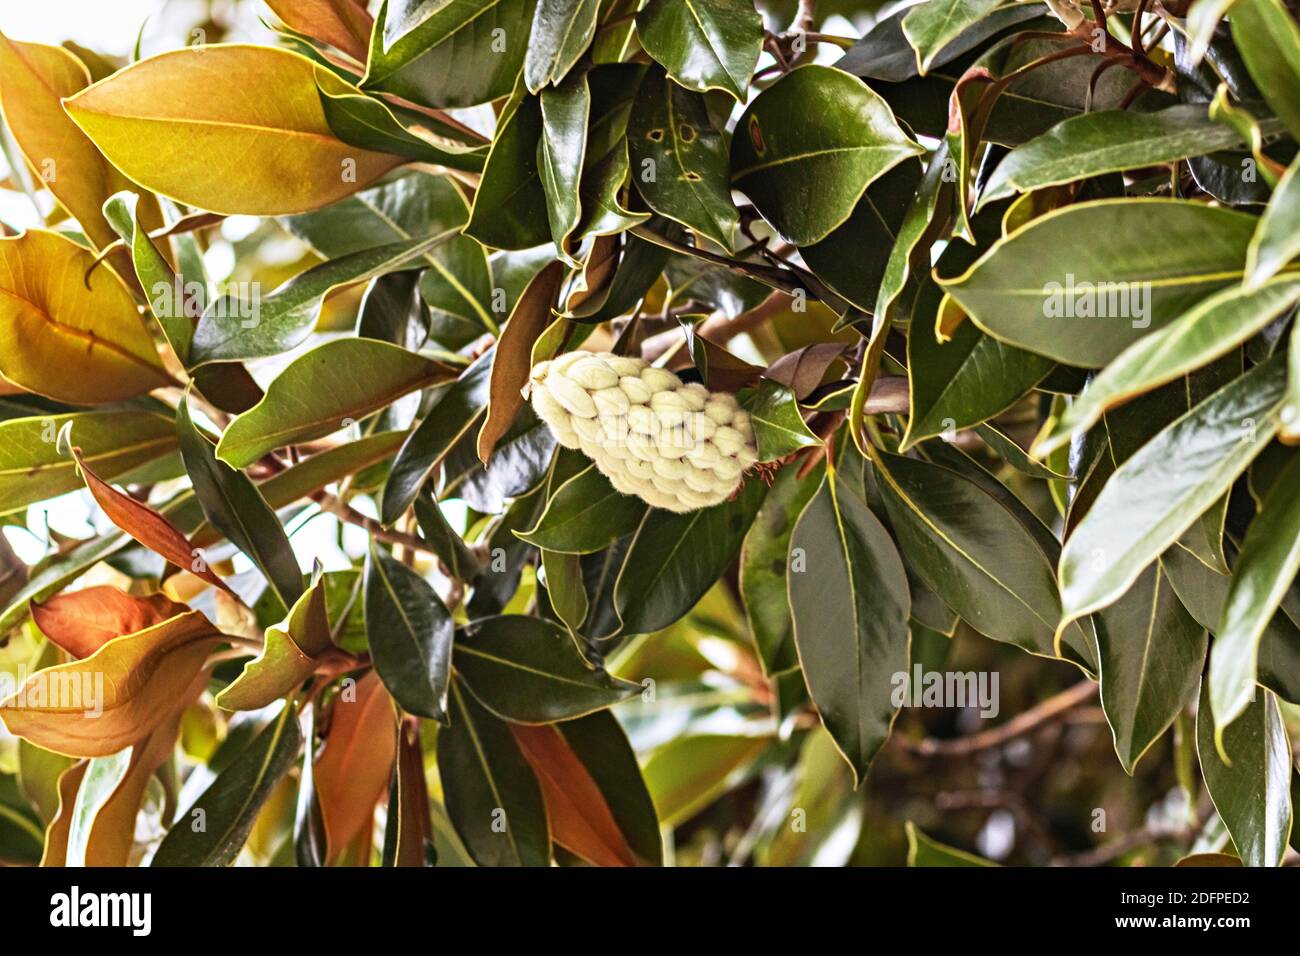 Magnolia tree with ripening white fruit and leaves. Stock Photo